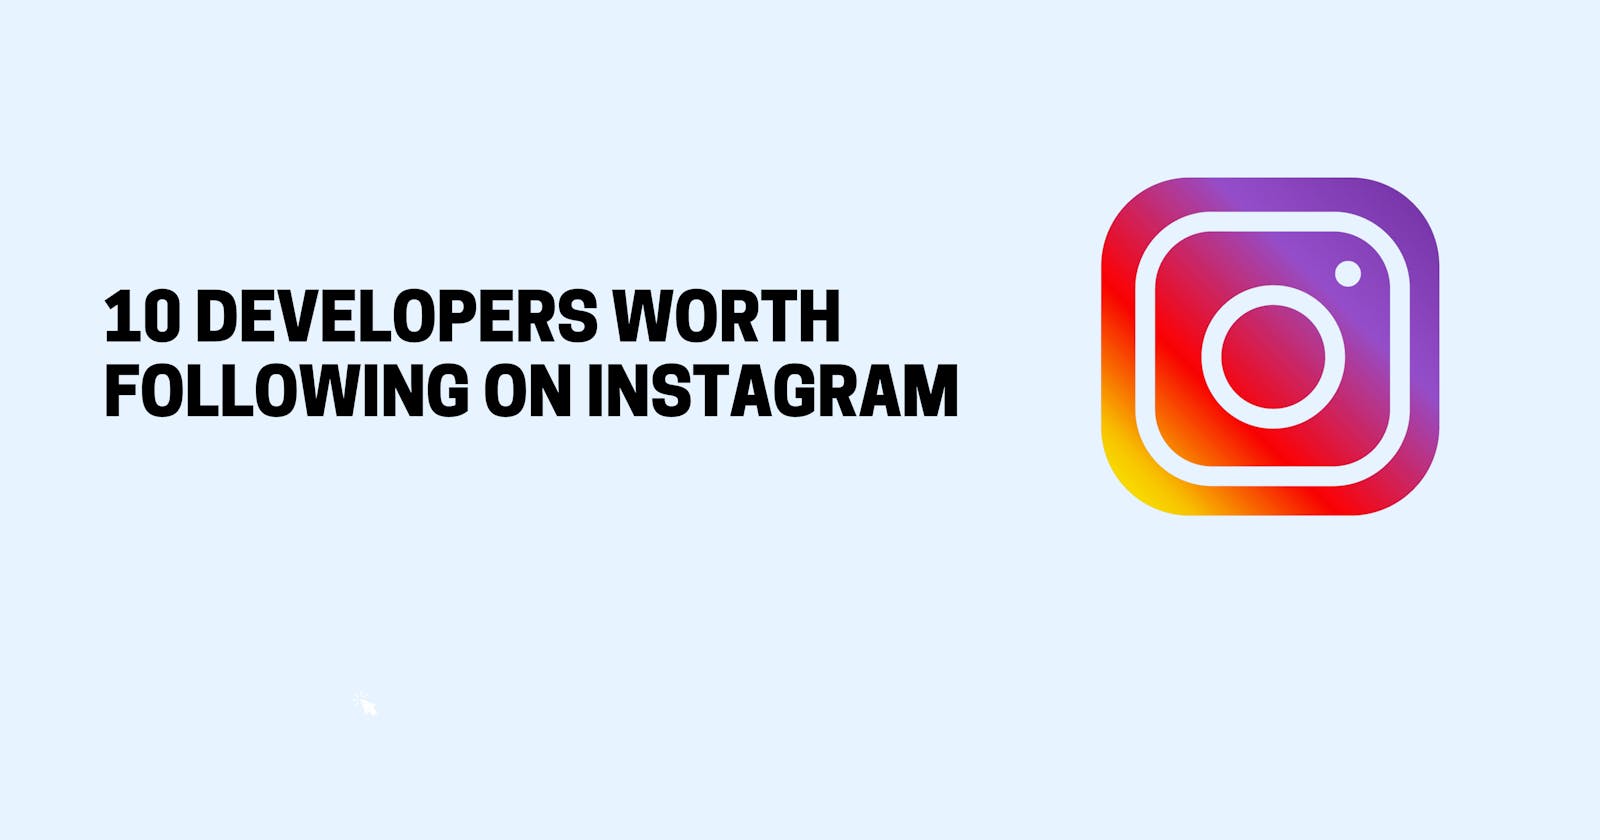 10 Developers Worth Following on Instagram